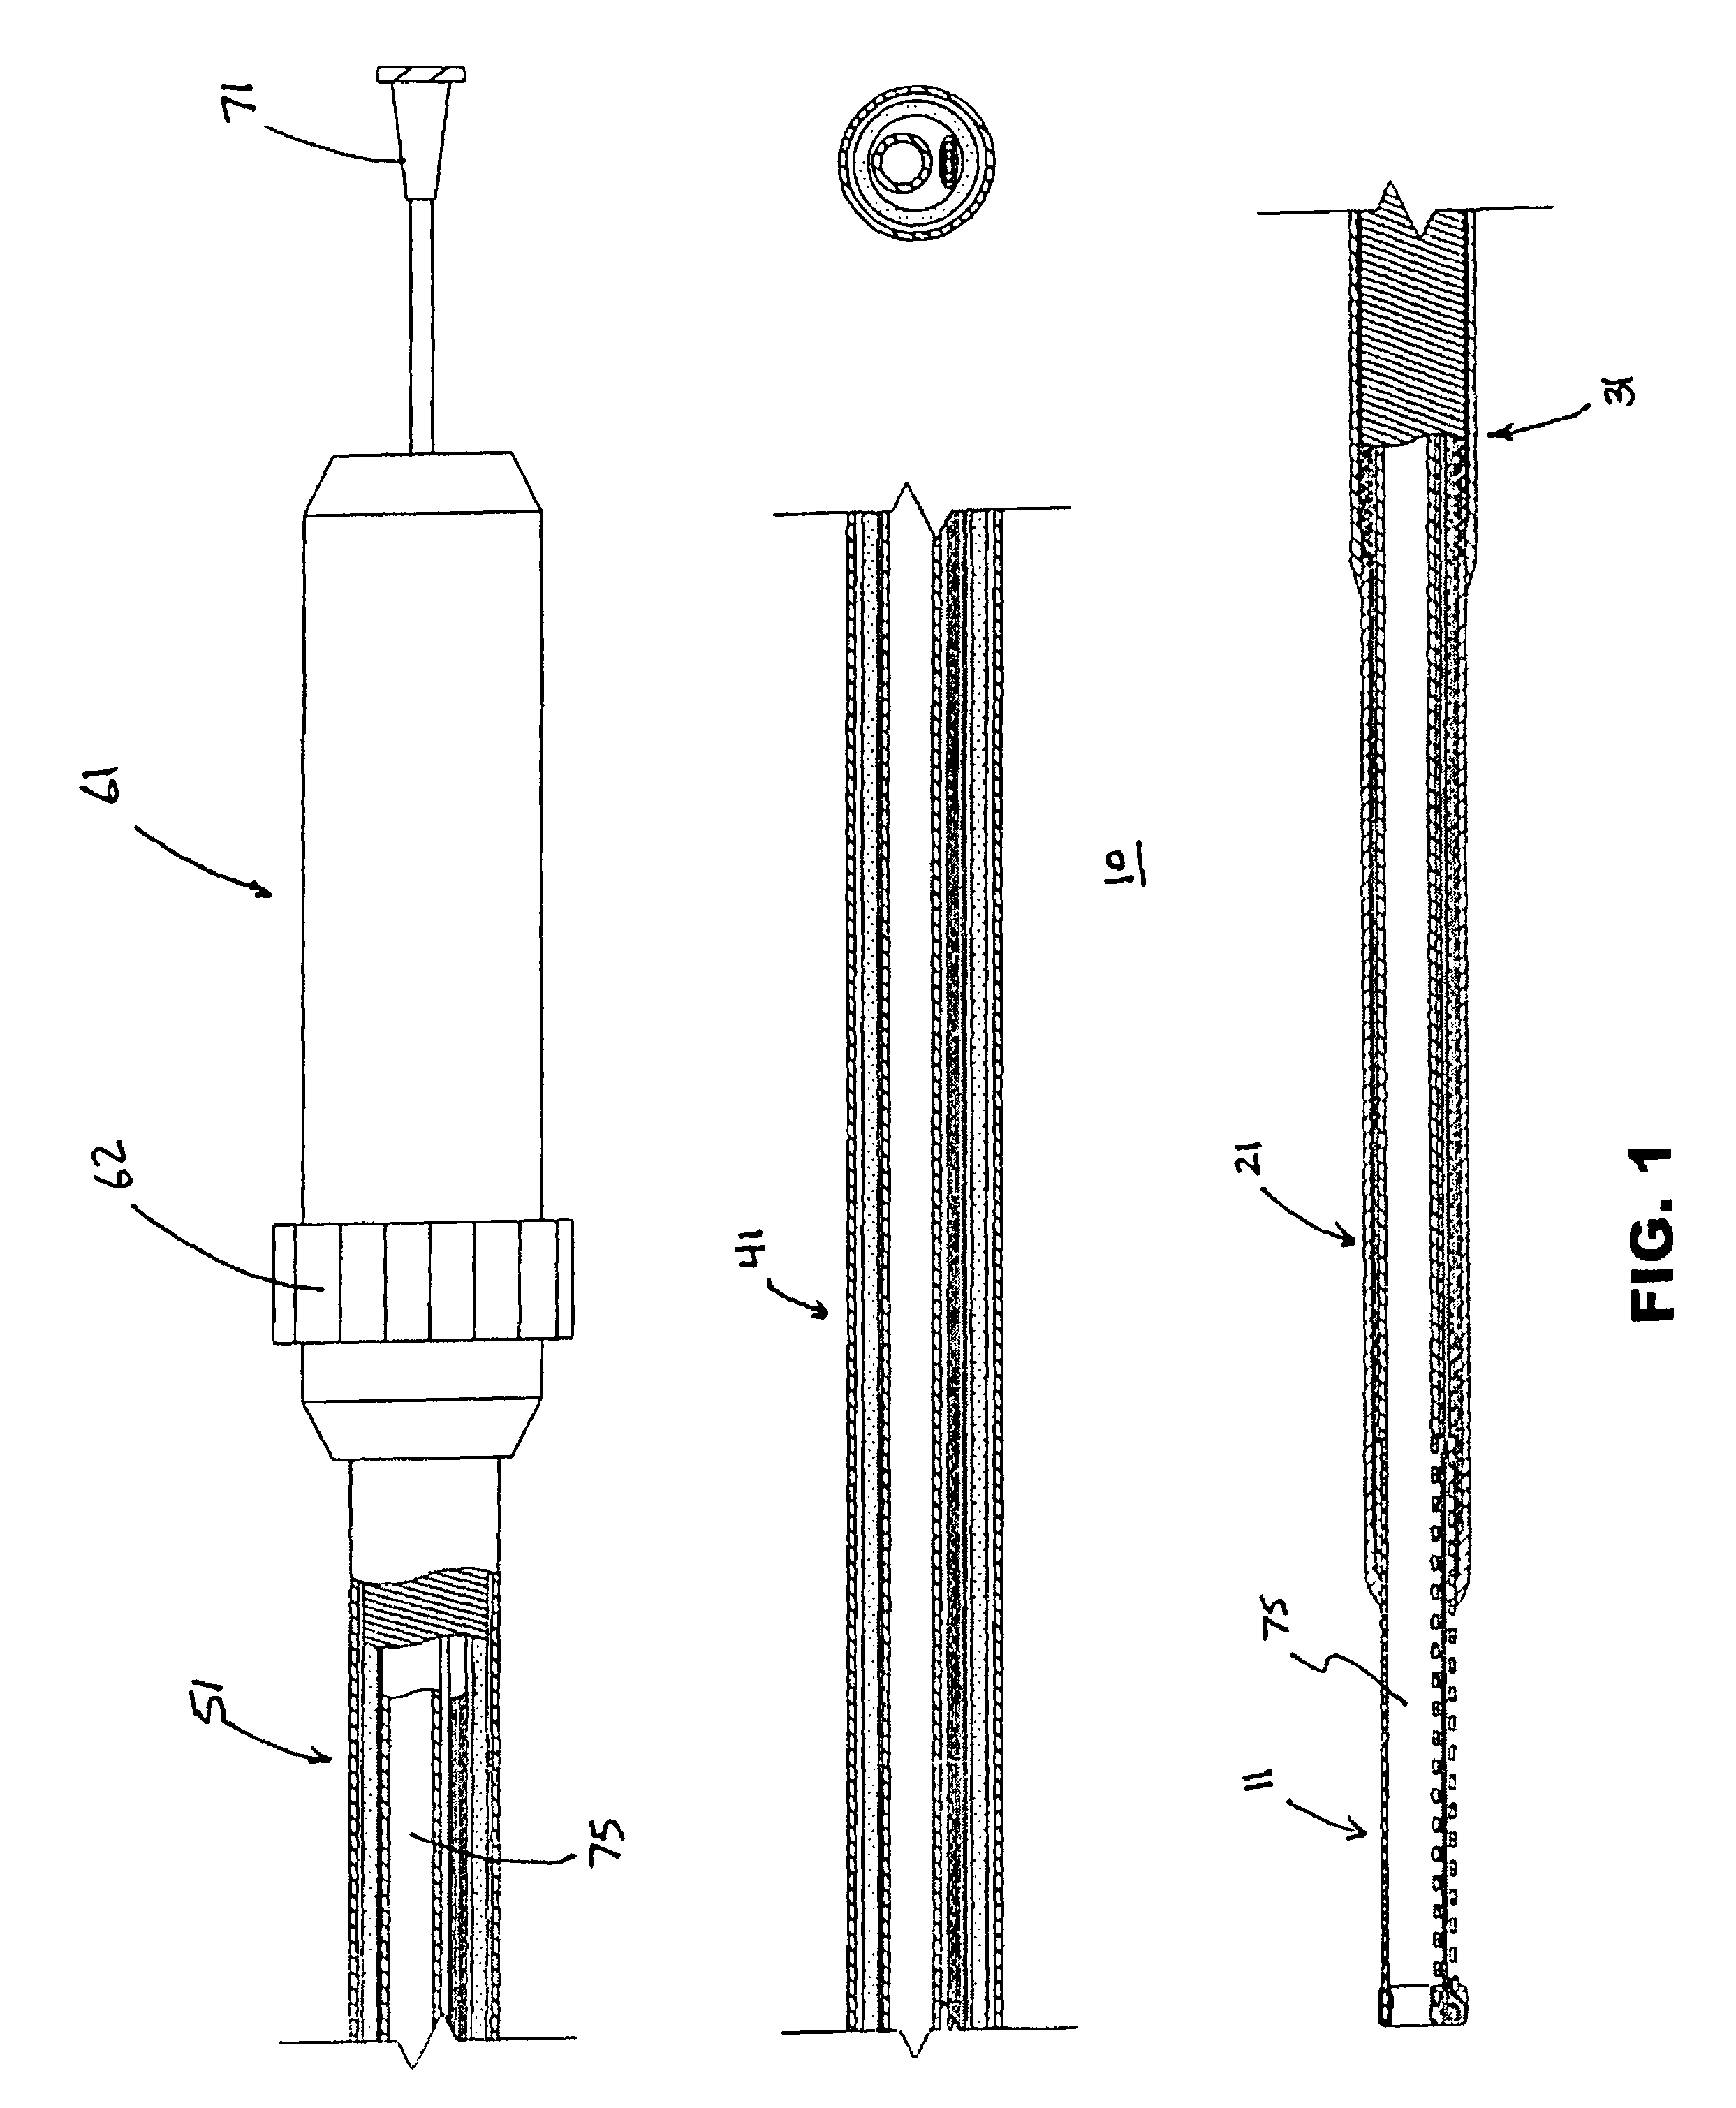 Devices and methods for crossing a chronic total occlusion